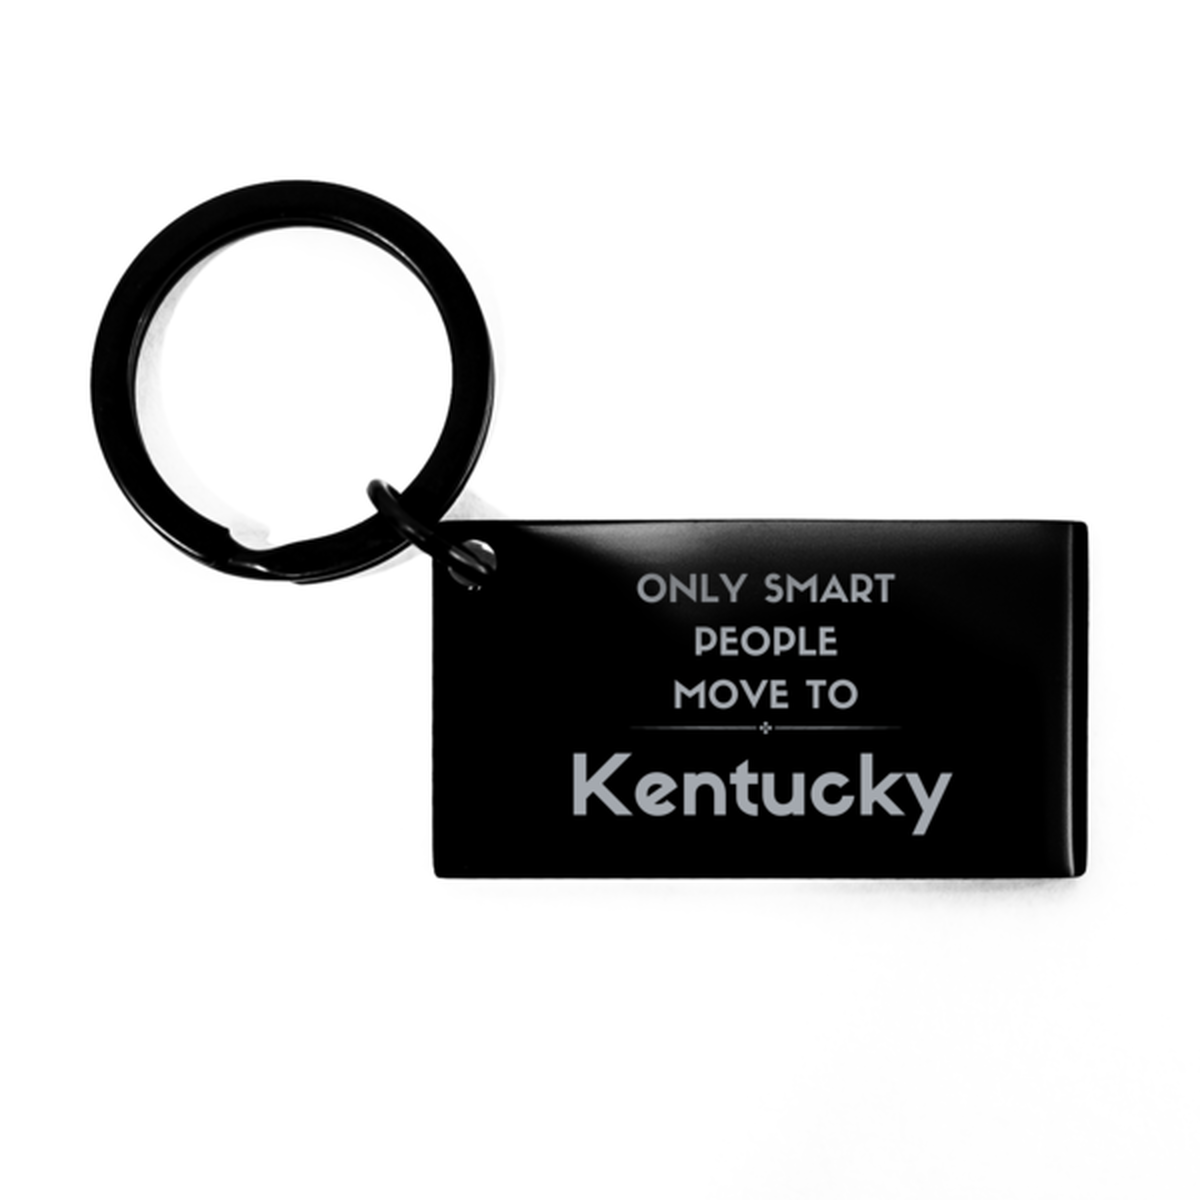 Only smart people move to Kentucky Keychain, Gag Gifts For Kentucky, Move to Kentucky Gifts for Friends Coworker Funny Saying Quote